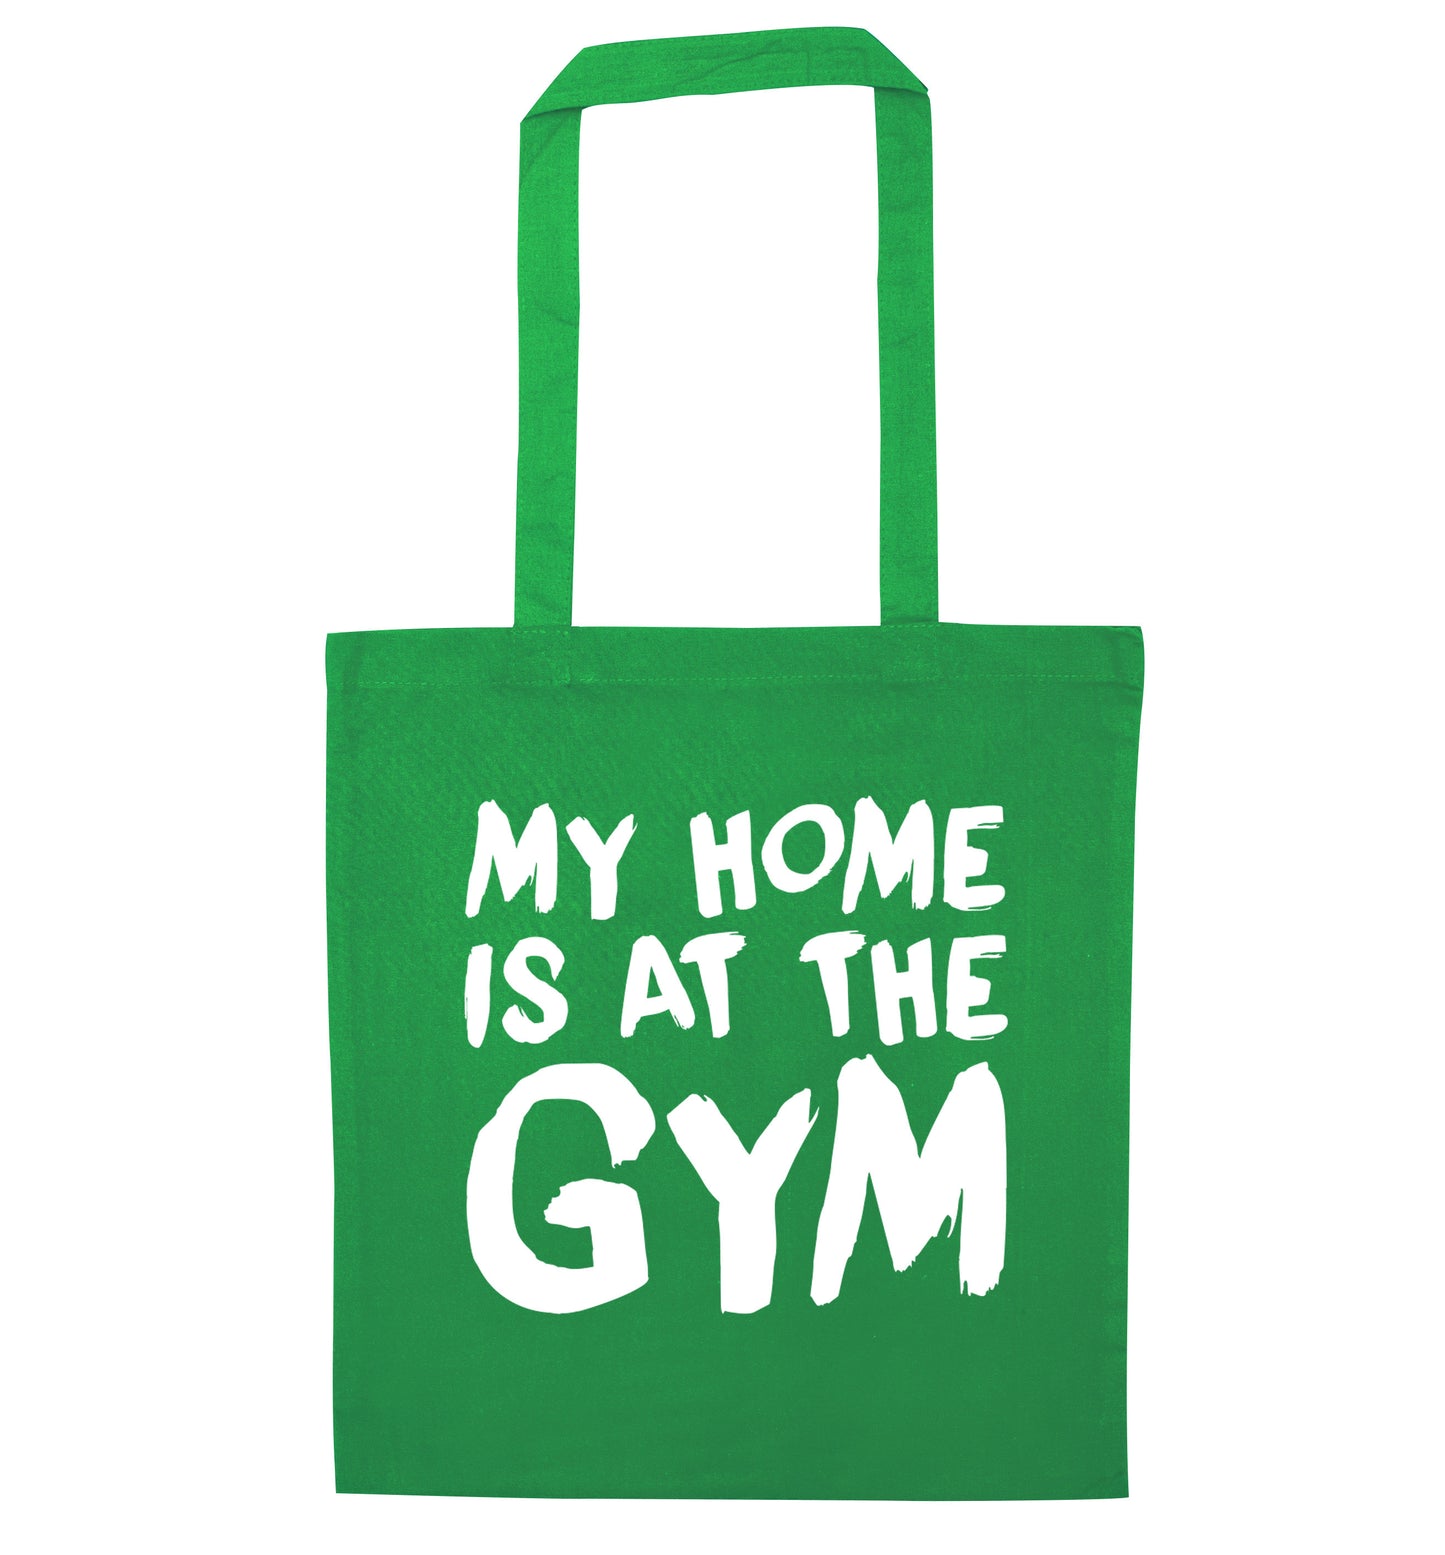 My home is at the gym green tote bag